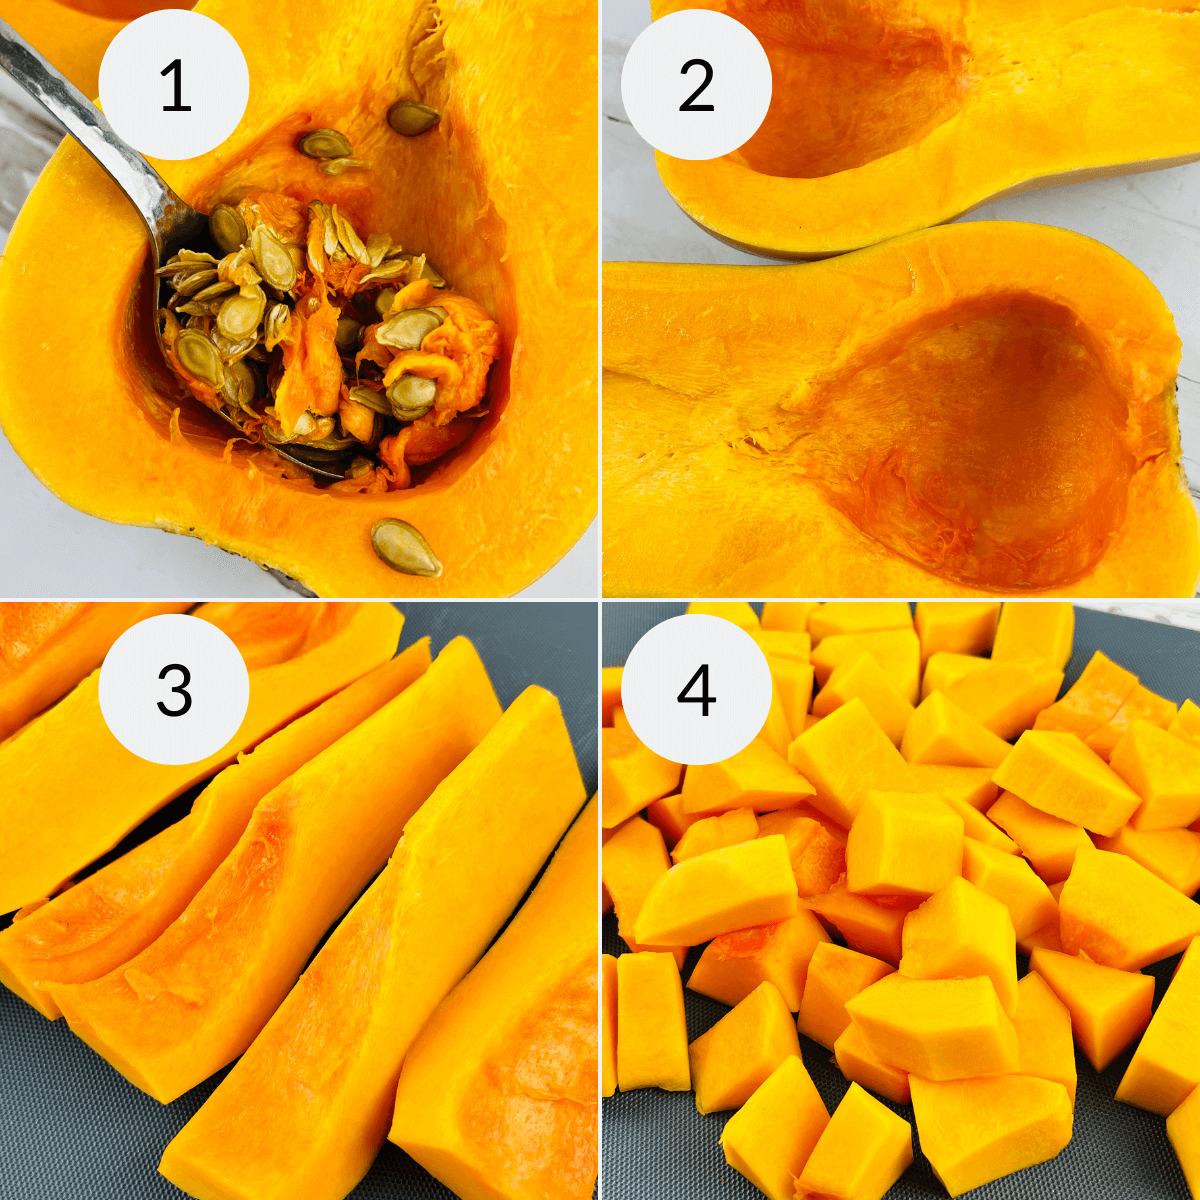 Slicing and preparing the squash and cubing.